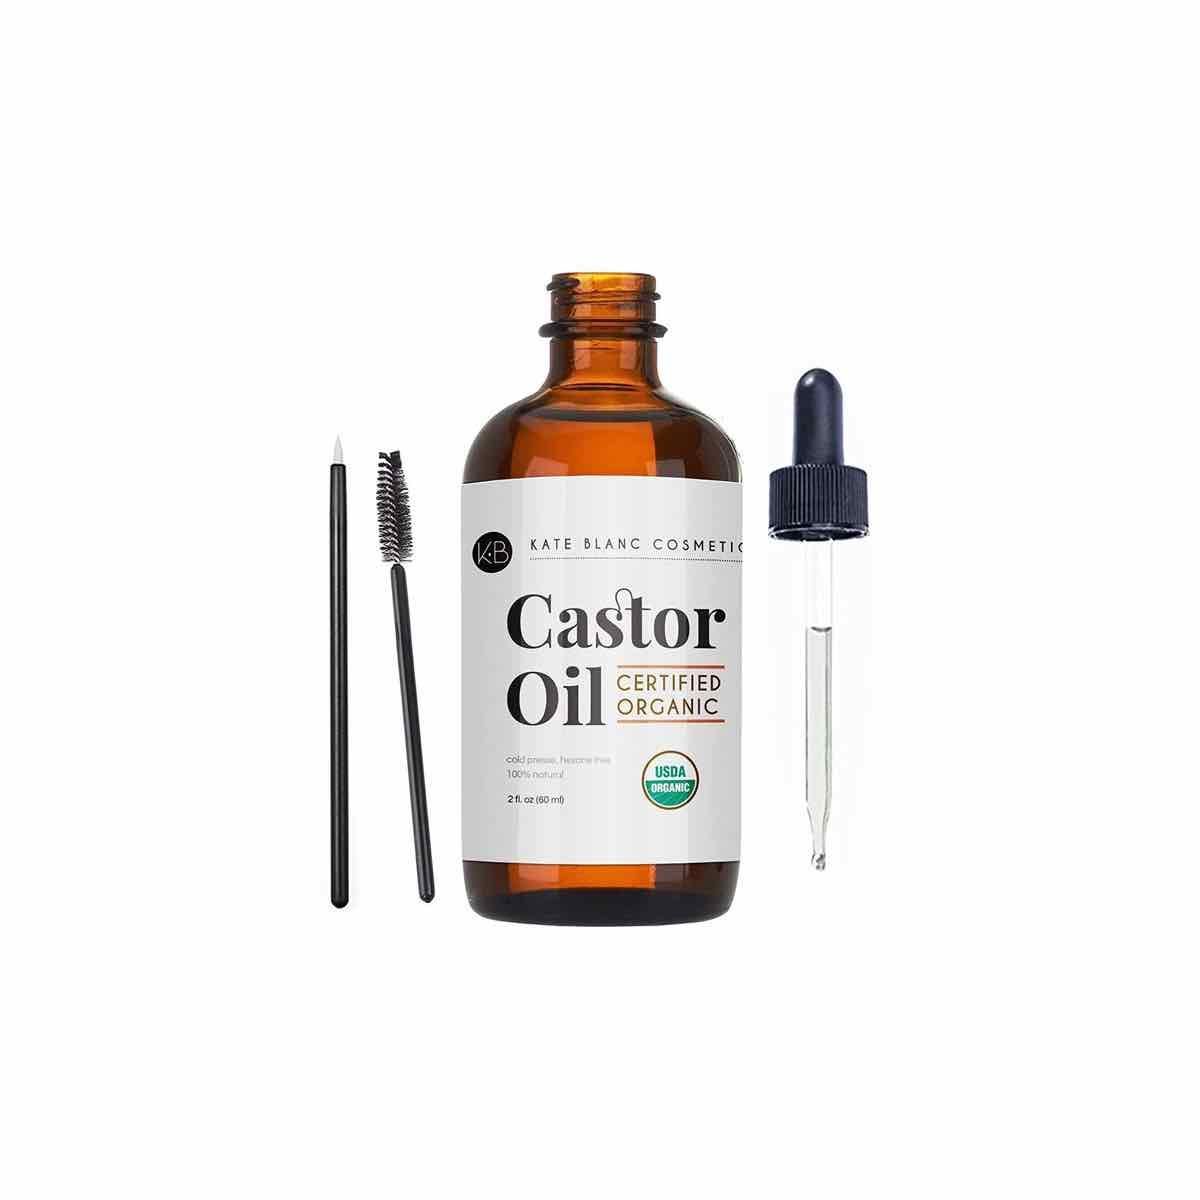 Castor Oil for Hair Growth: Does It Actually Work?